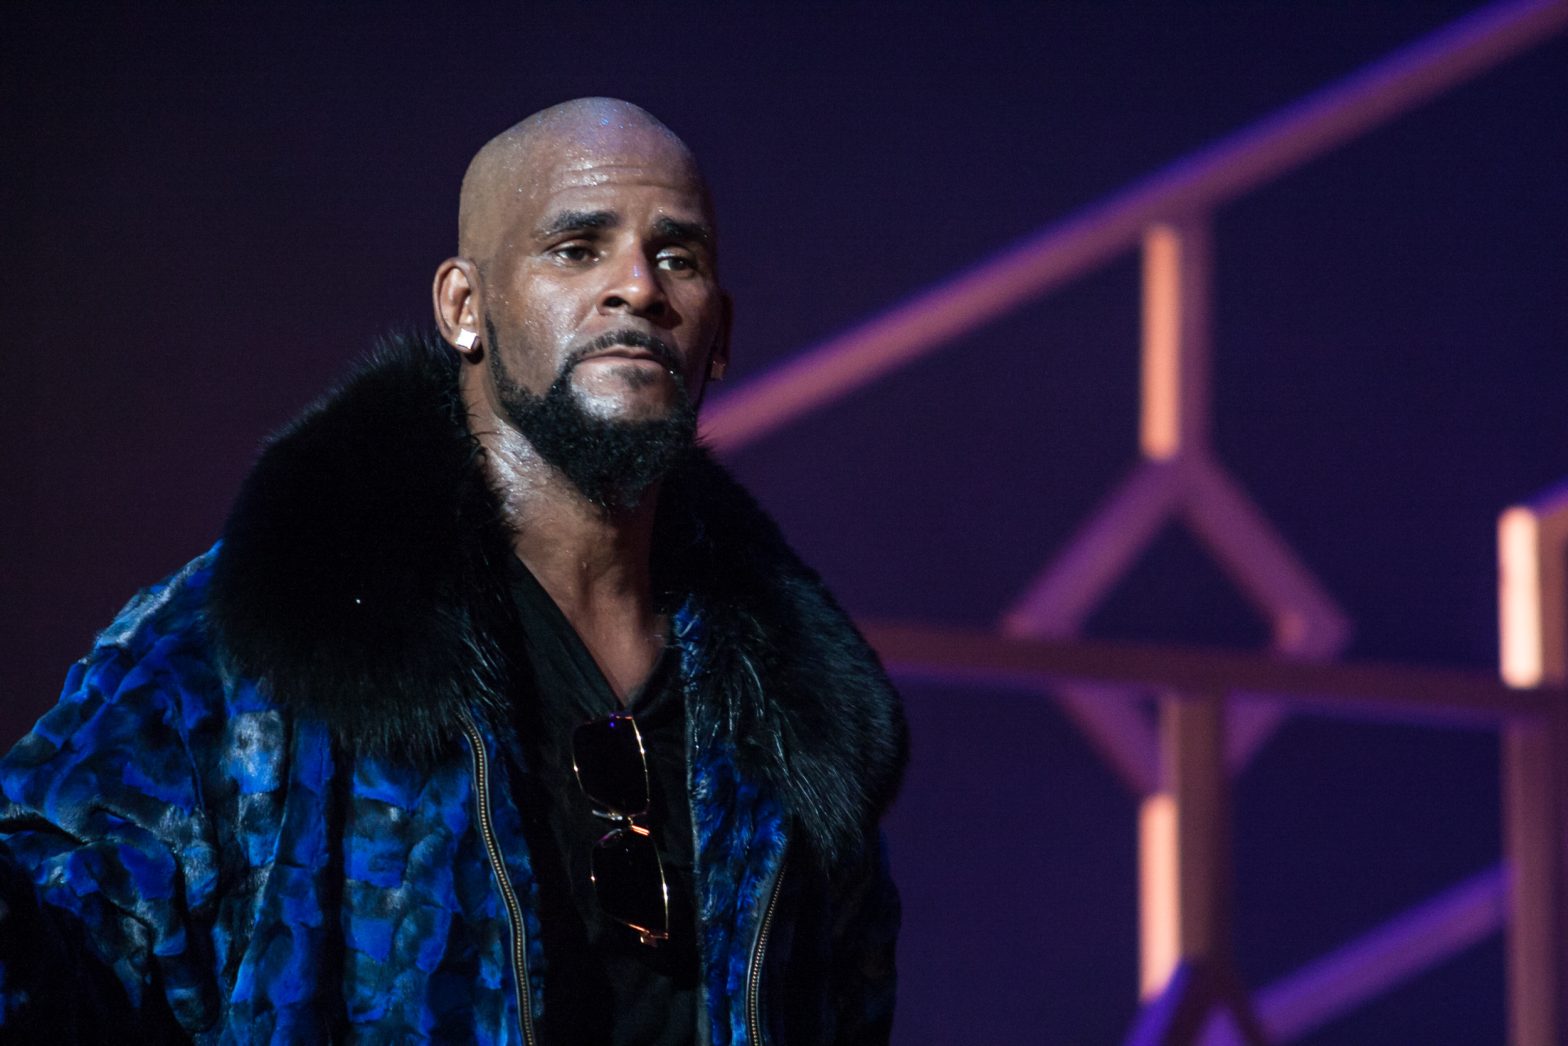 R. Kelly performs on stage.